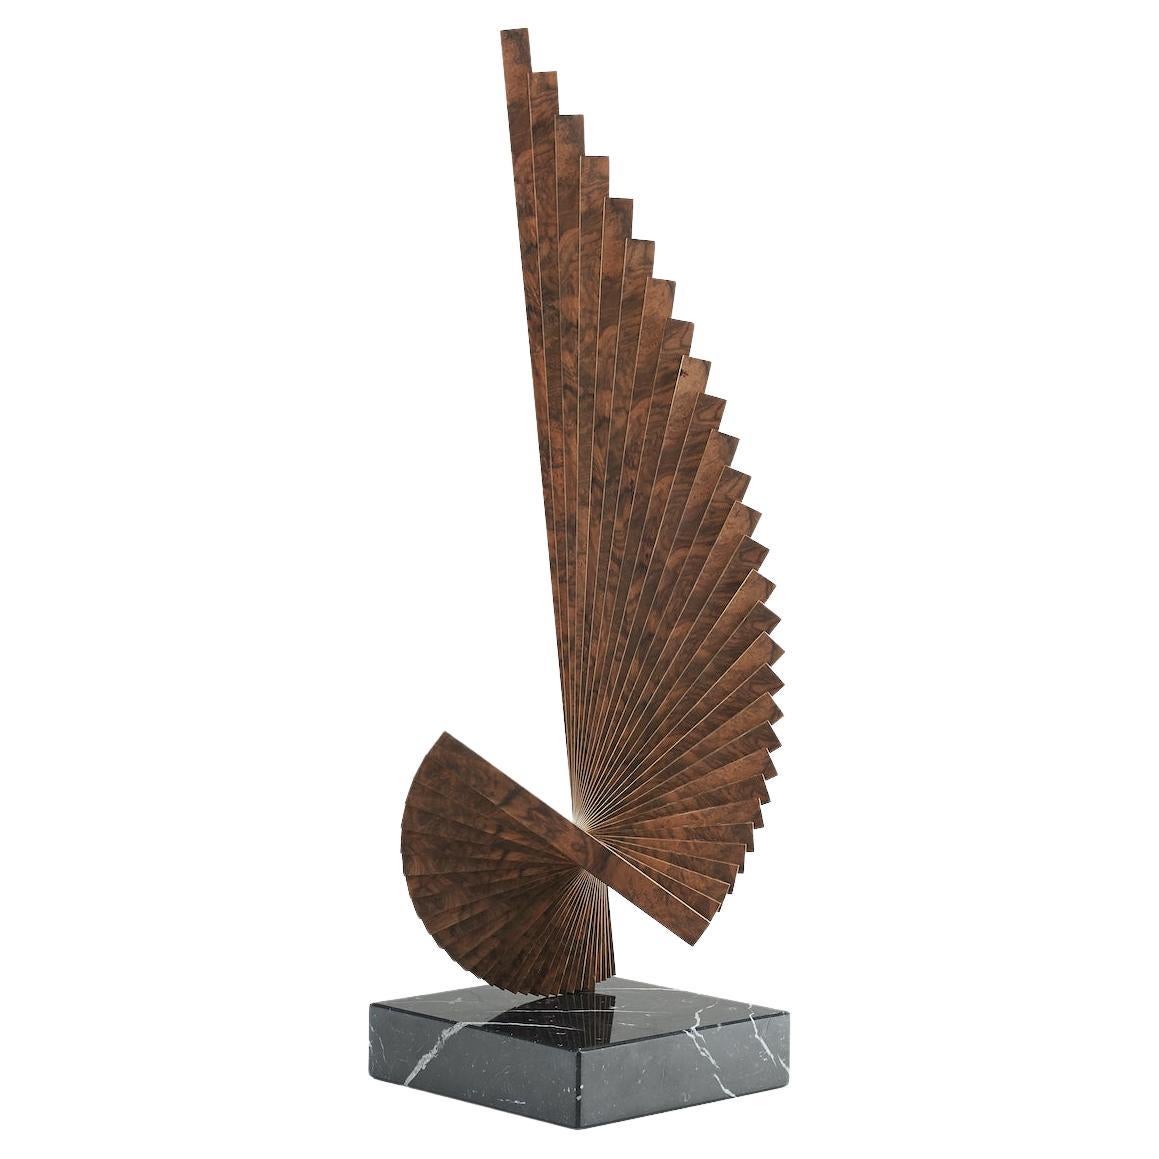 Tabletop sculpture constructed from flitches of book-matched walnut and brass